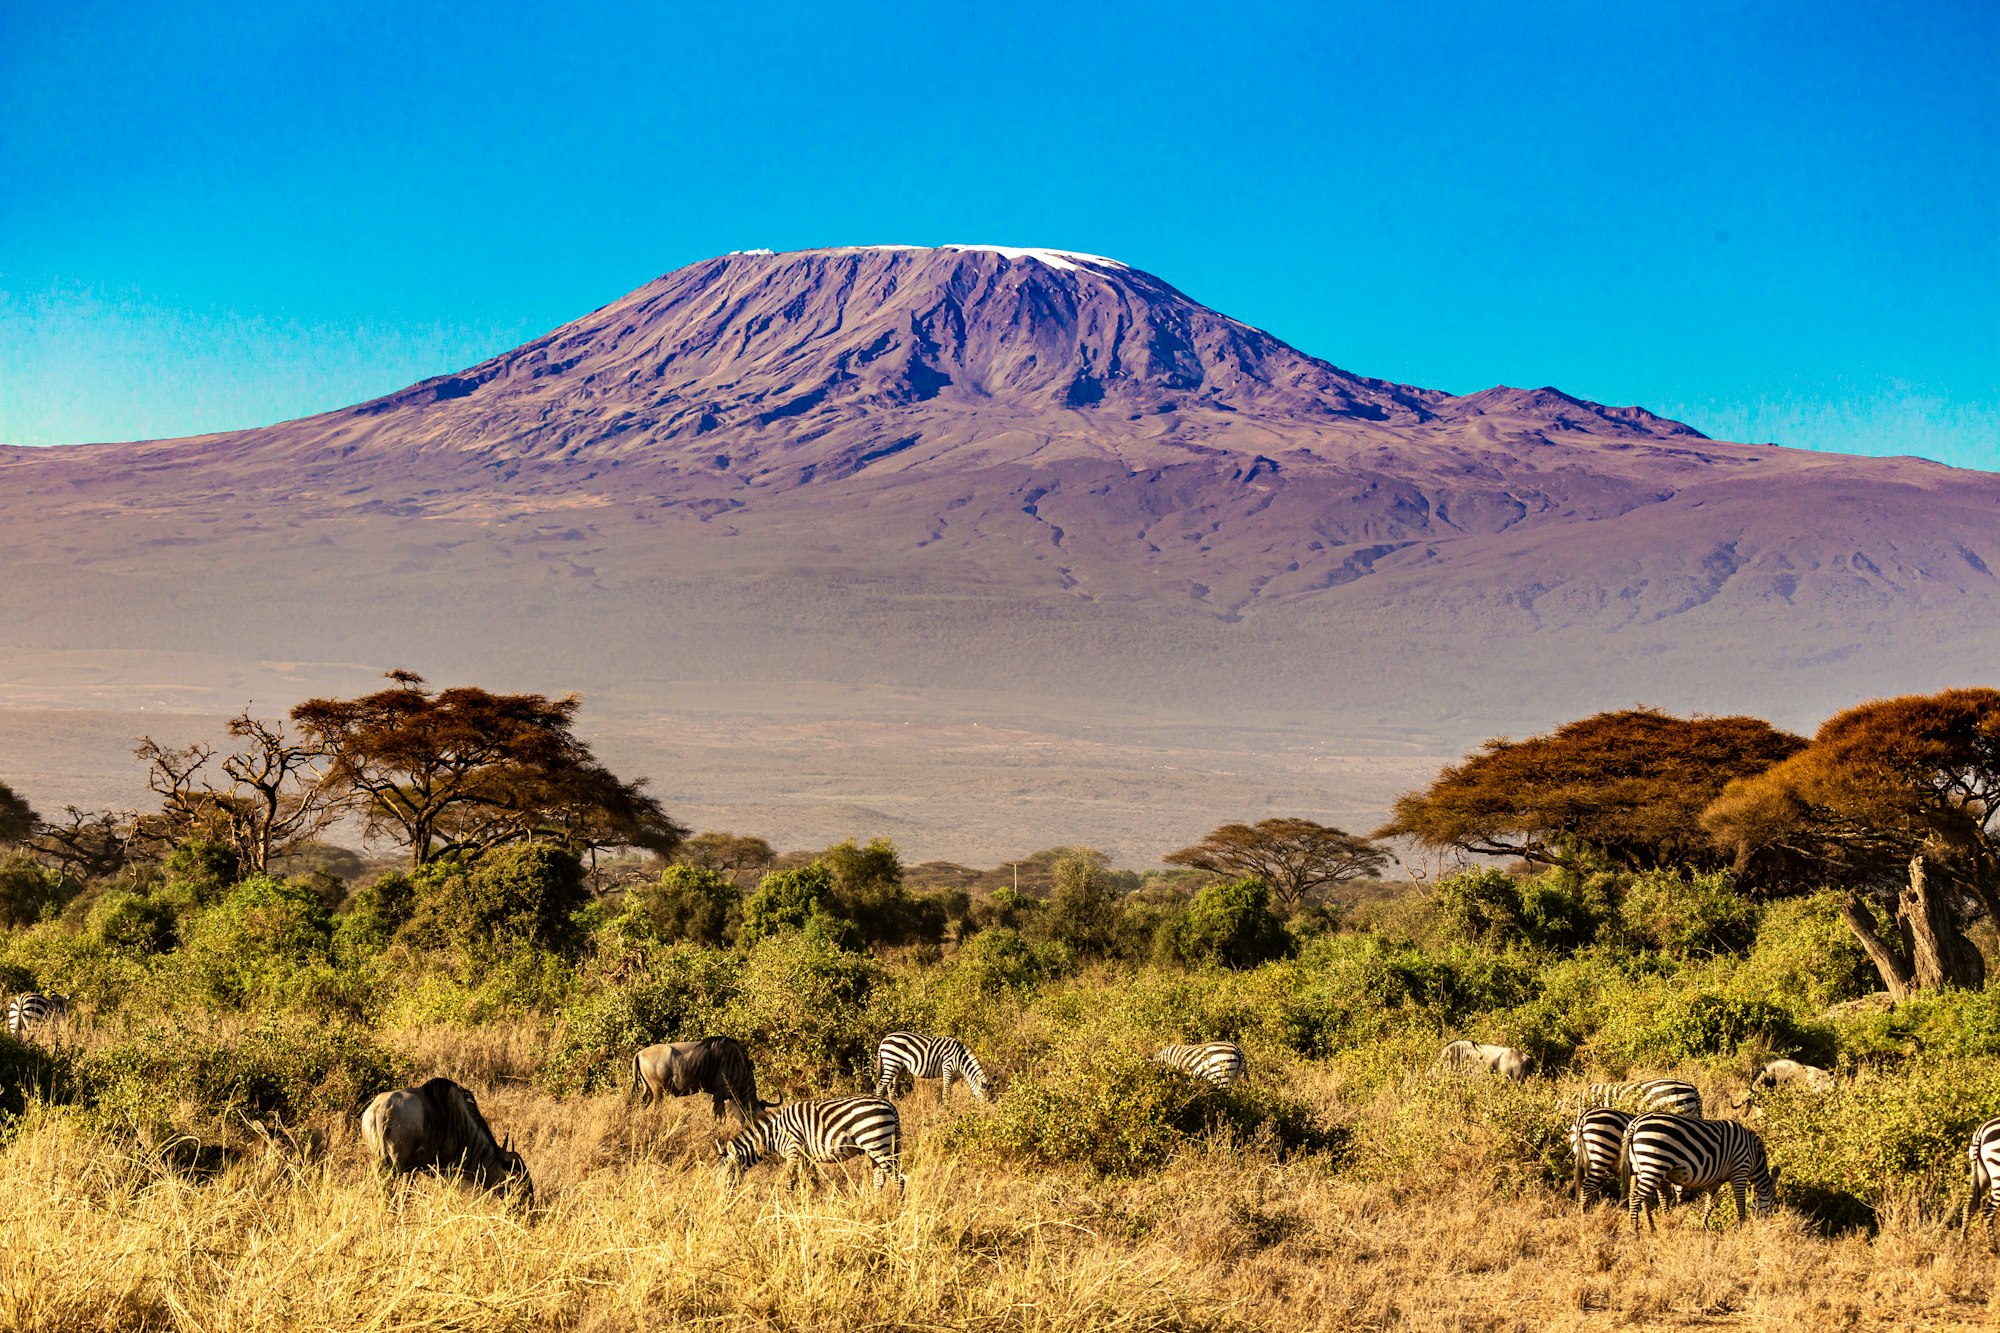 Kilimanjaro no clouds in african Winter from Amboseli national park – Kenia with zebras and giraffes